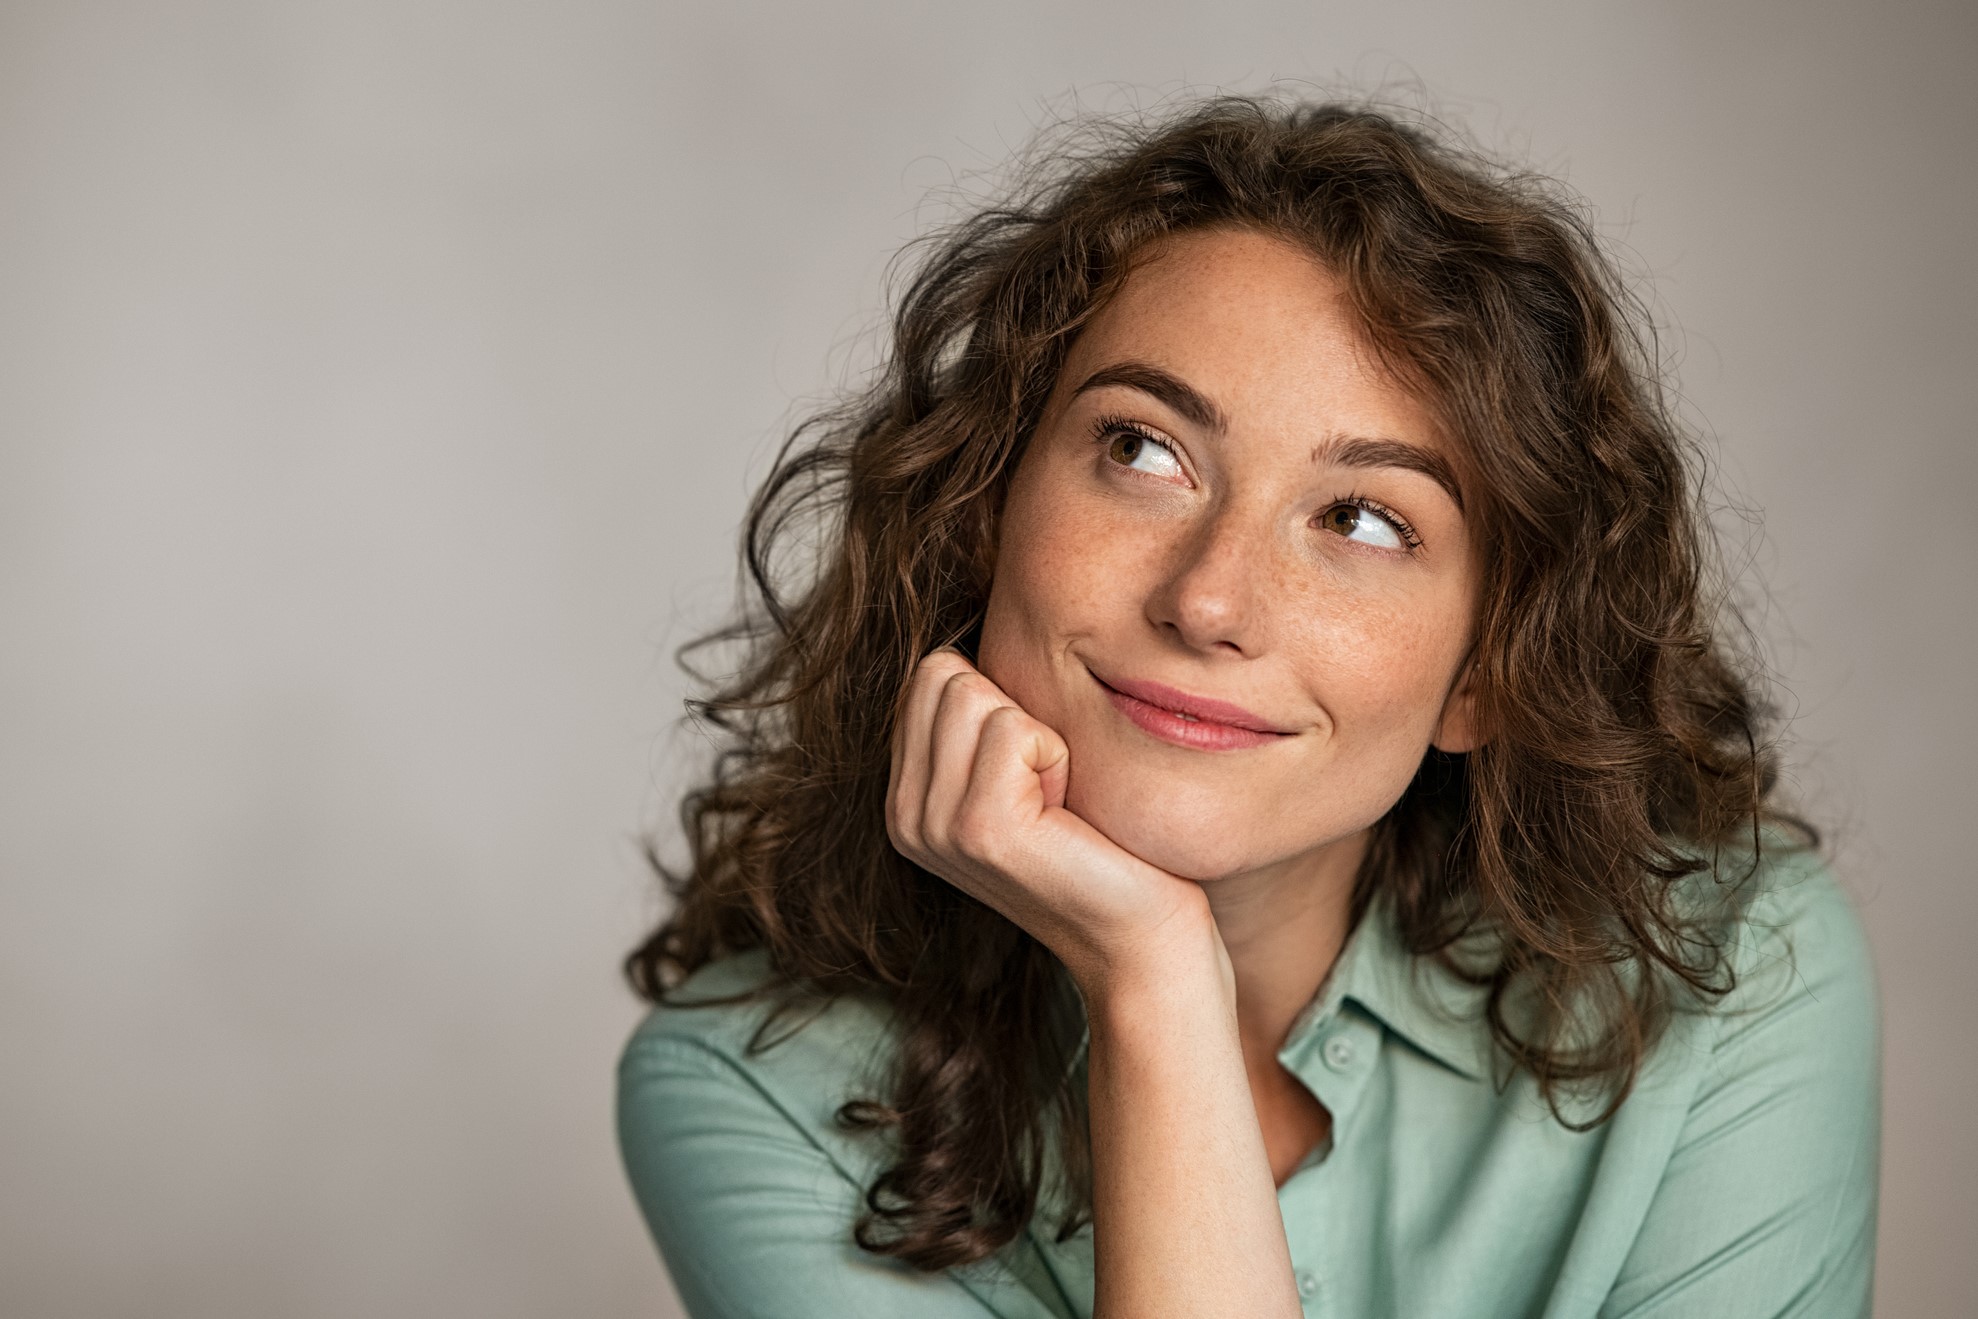 Woman smiling and thinking